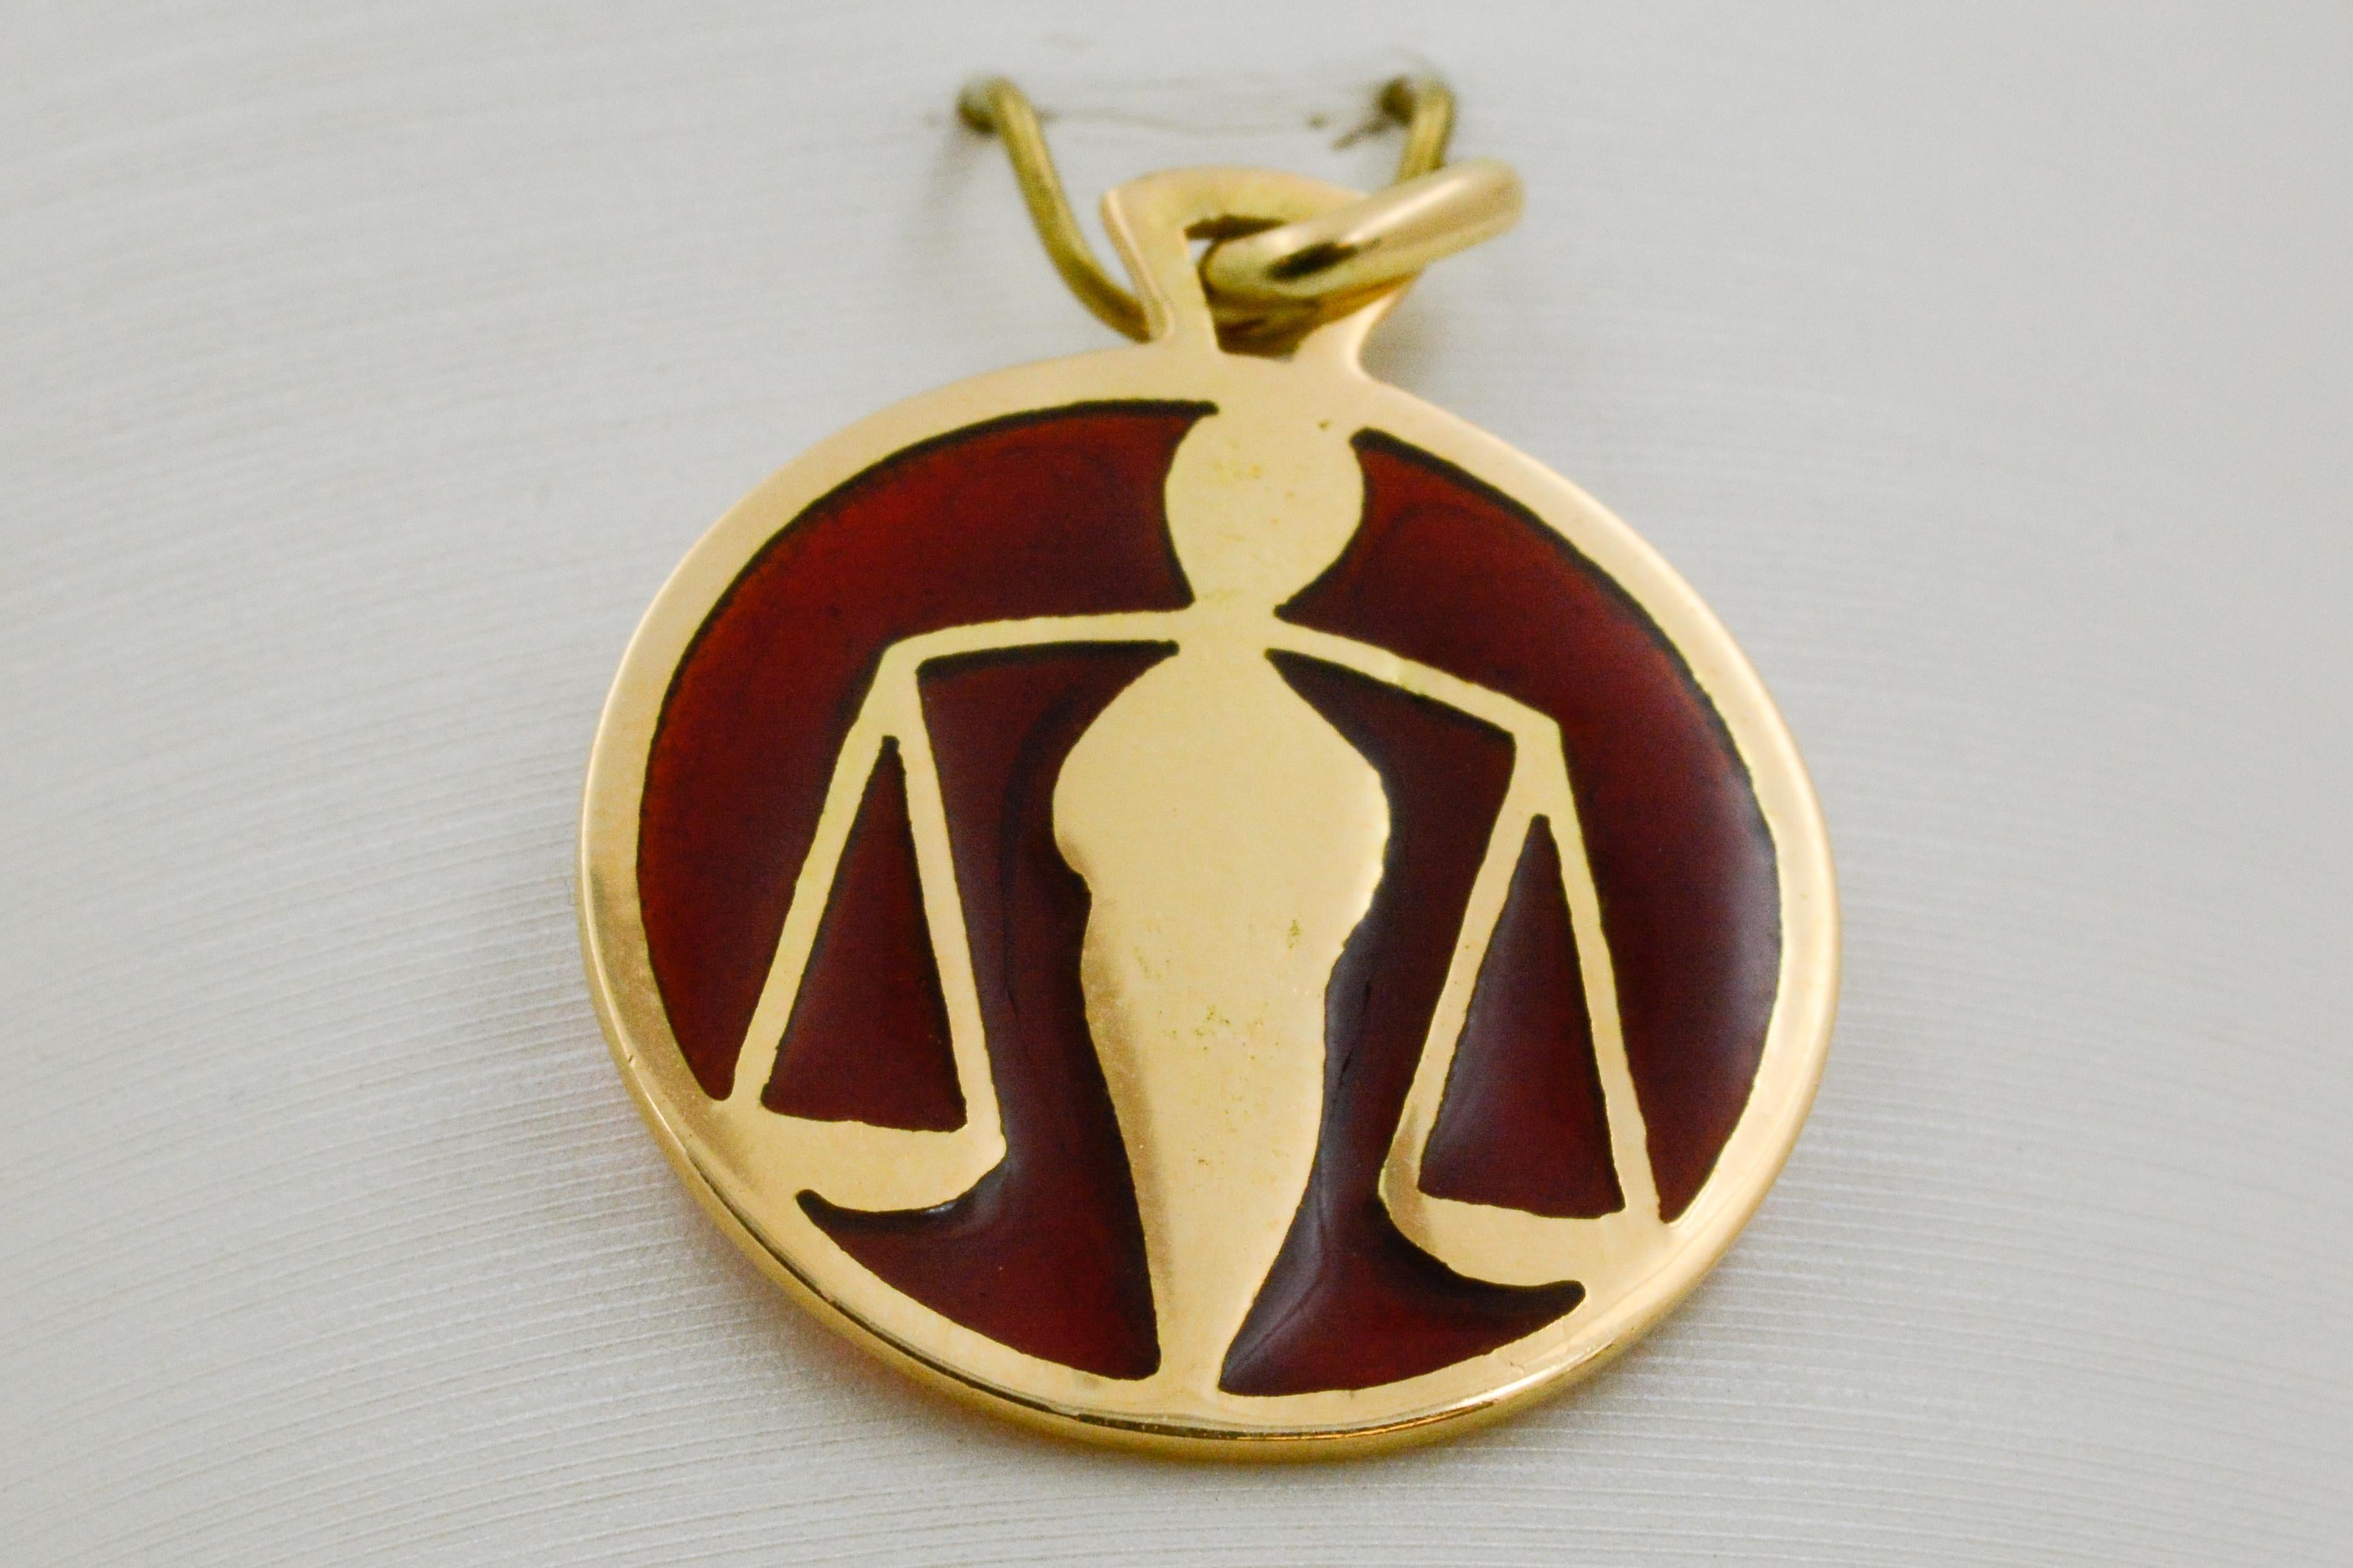 The Libra zodiac sign is showcased on this handcrafted enameled glass Plique a Jour pendant. The green and yellow Libra sign rests on an amber background with an 18 karat yellow gold outline. 

